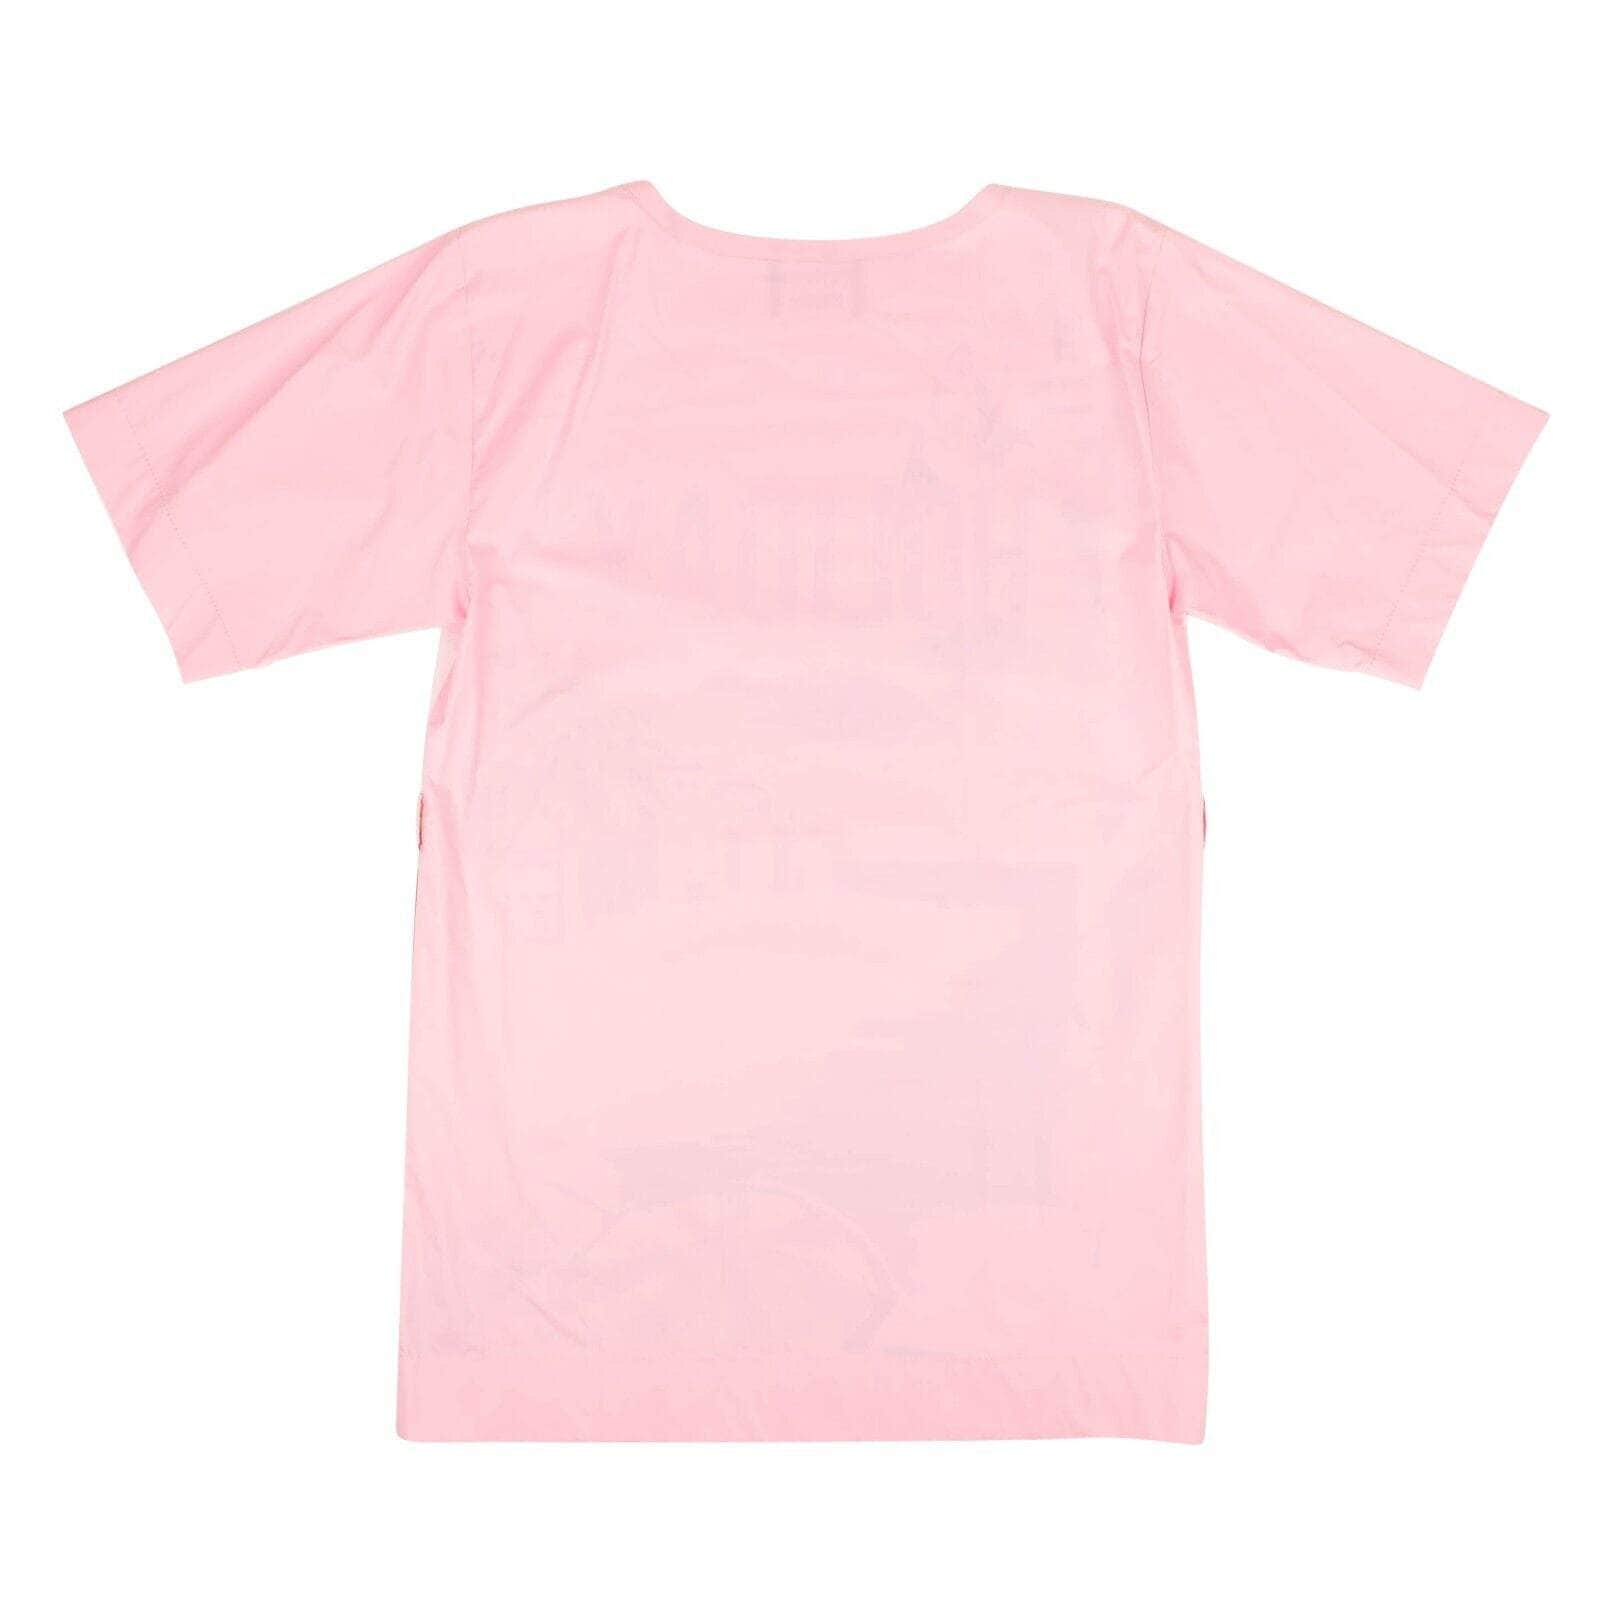 BOUTIQUE MOSCHINO boutique-moschino, channelenable-all, chicmi, couponcollection, gender-womens, main-clothing, MixedApparel, moswc1, size-36, size-38, size-40, size-44, under-250, womens-day-dresses Pink Holiday Straight Mini Dress